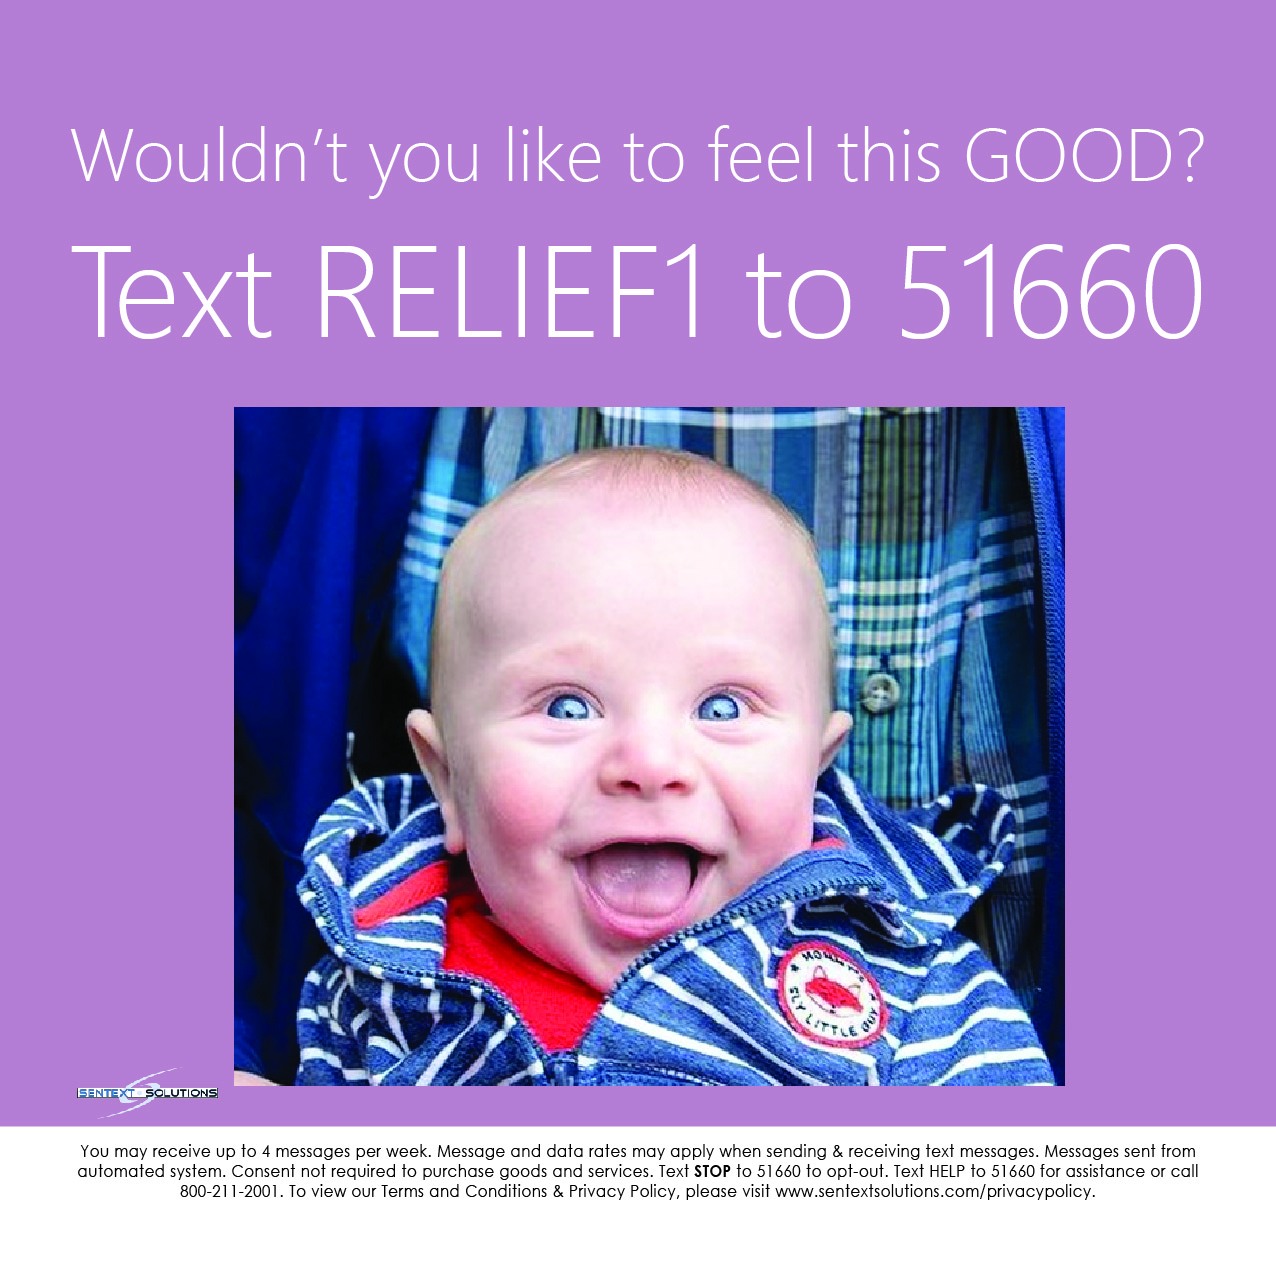 Text RELIEF1 to 51660 Baby Smiling Image